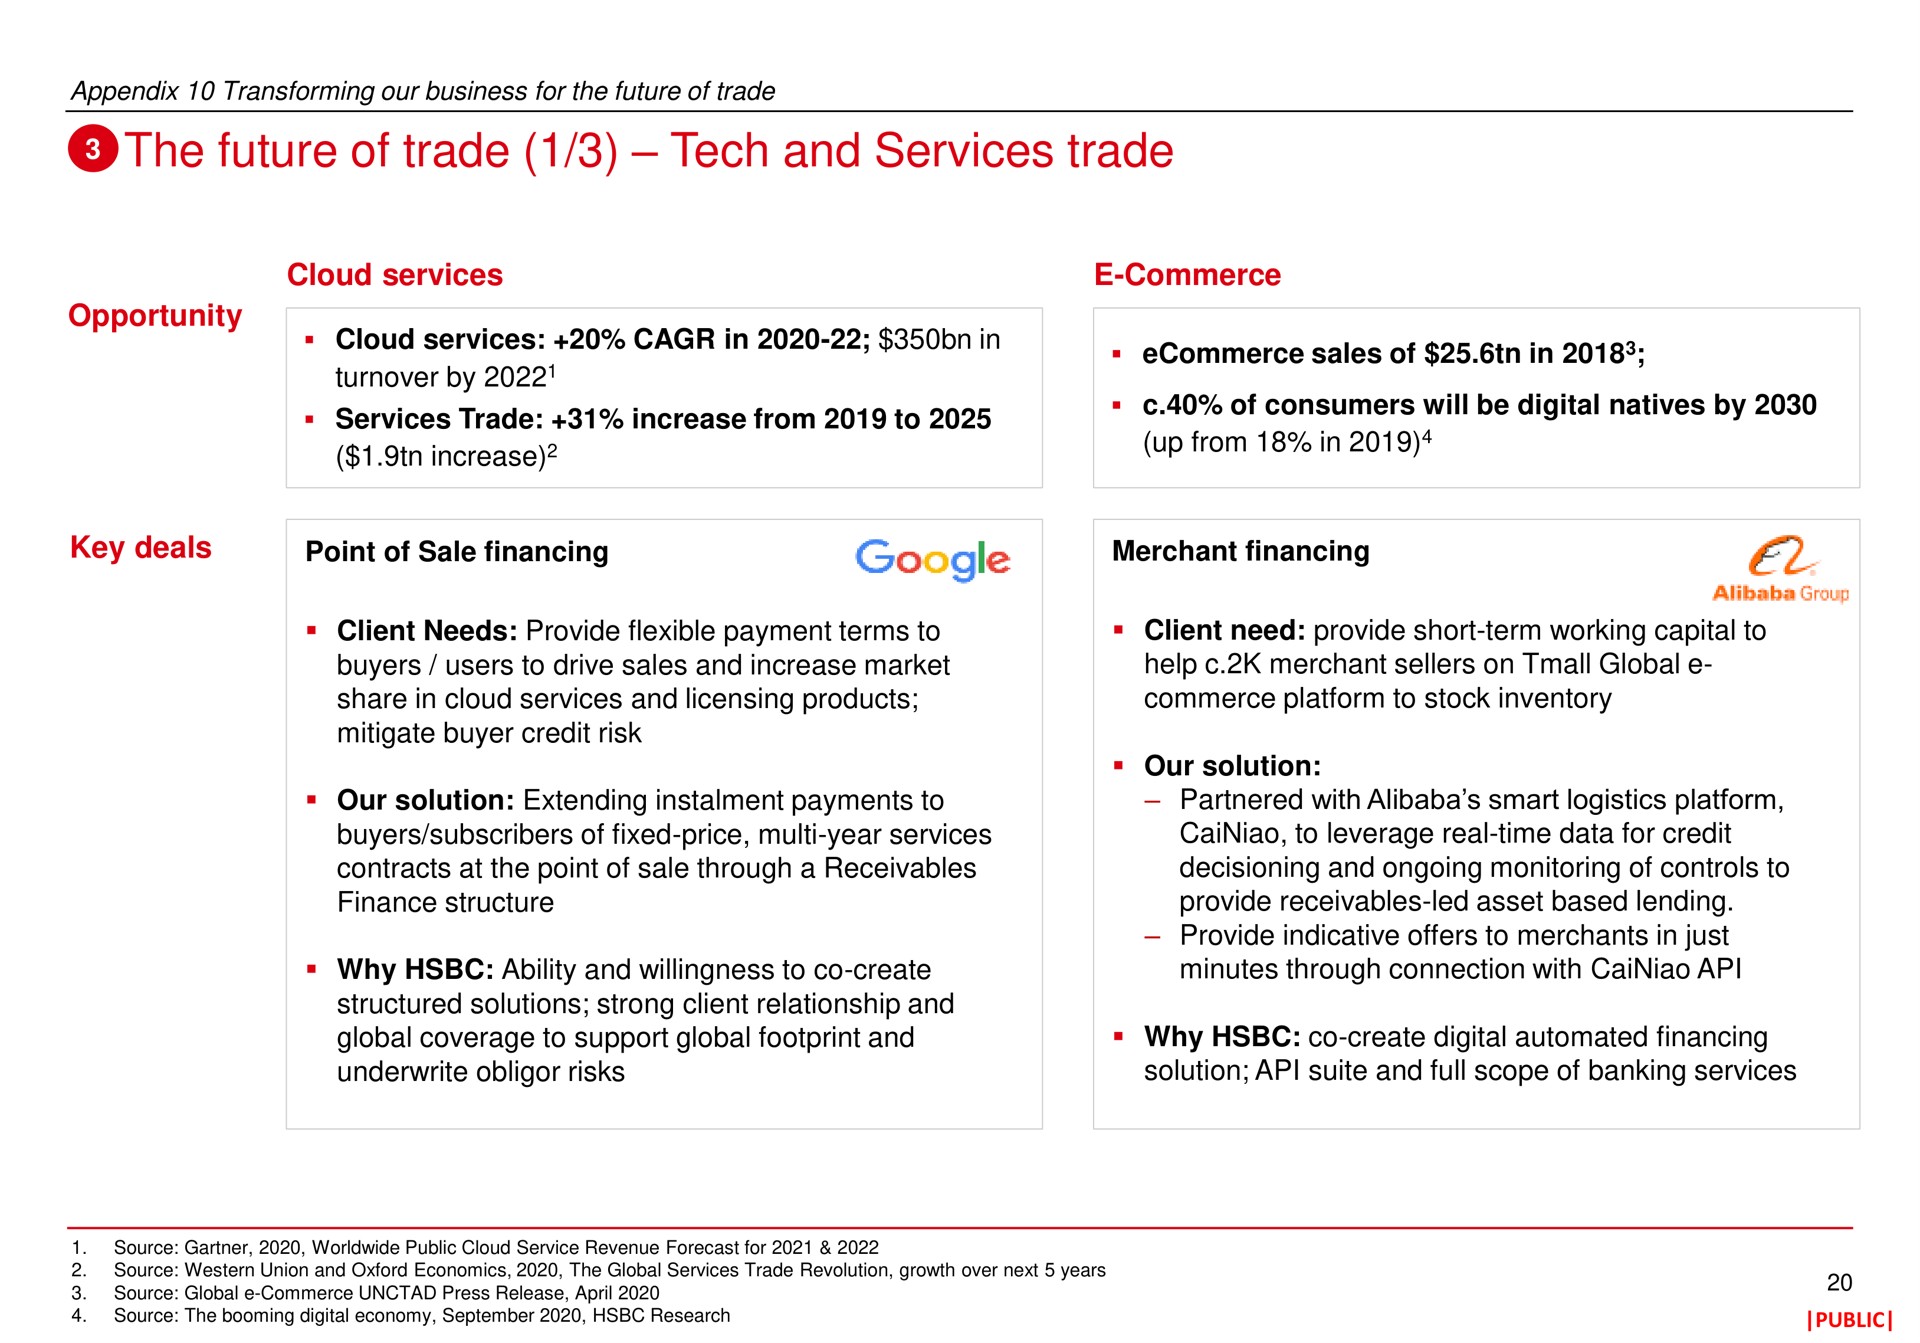 the future of trade tech and services trade | HSBC